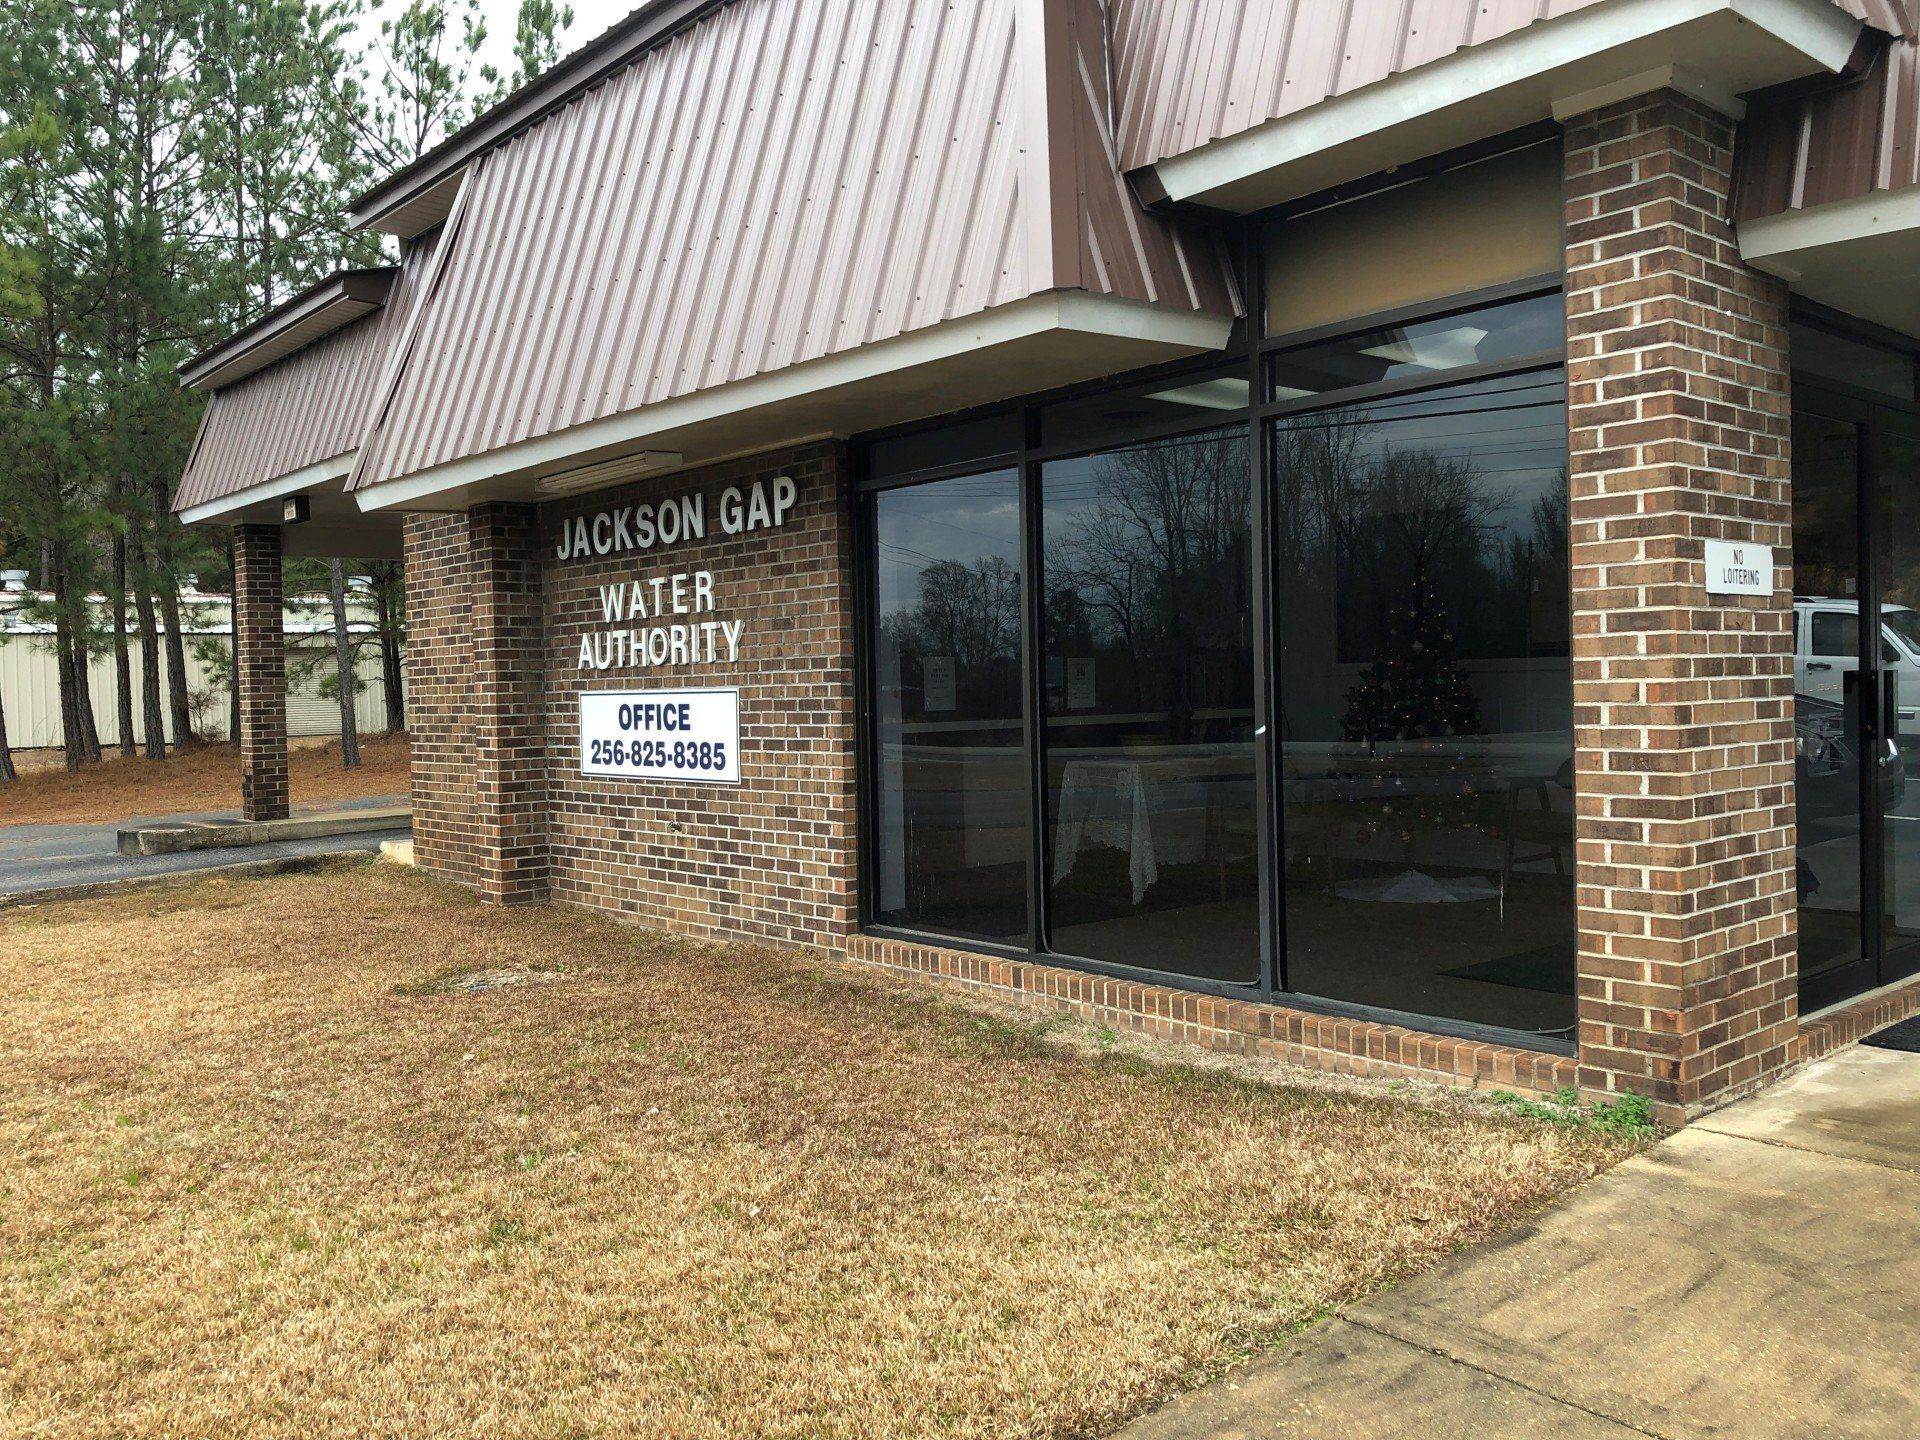 Professional office window tinting service - home or business tinting in Alabama